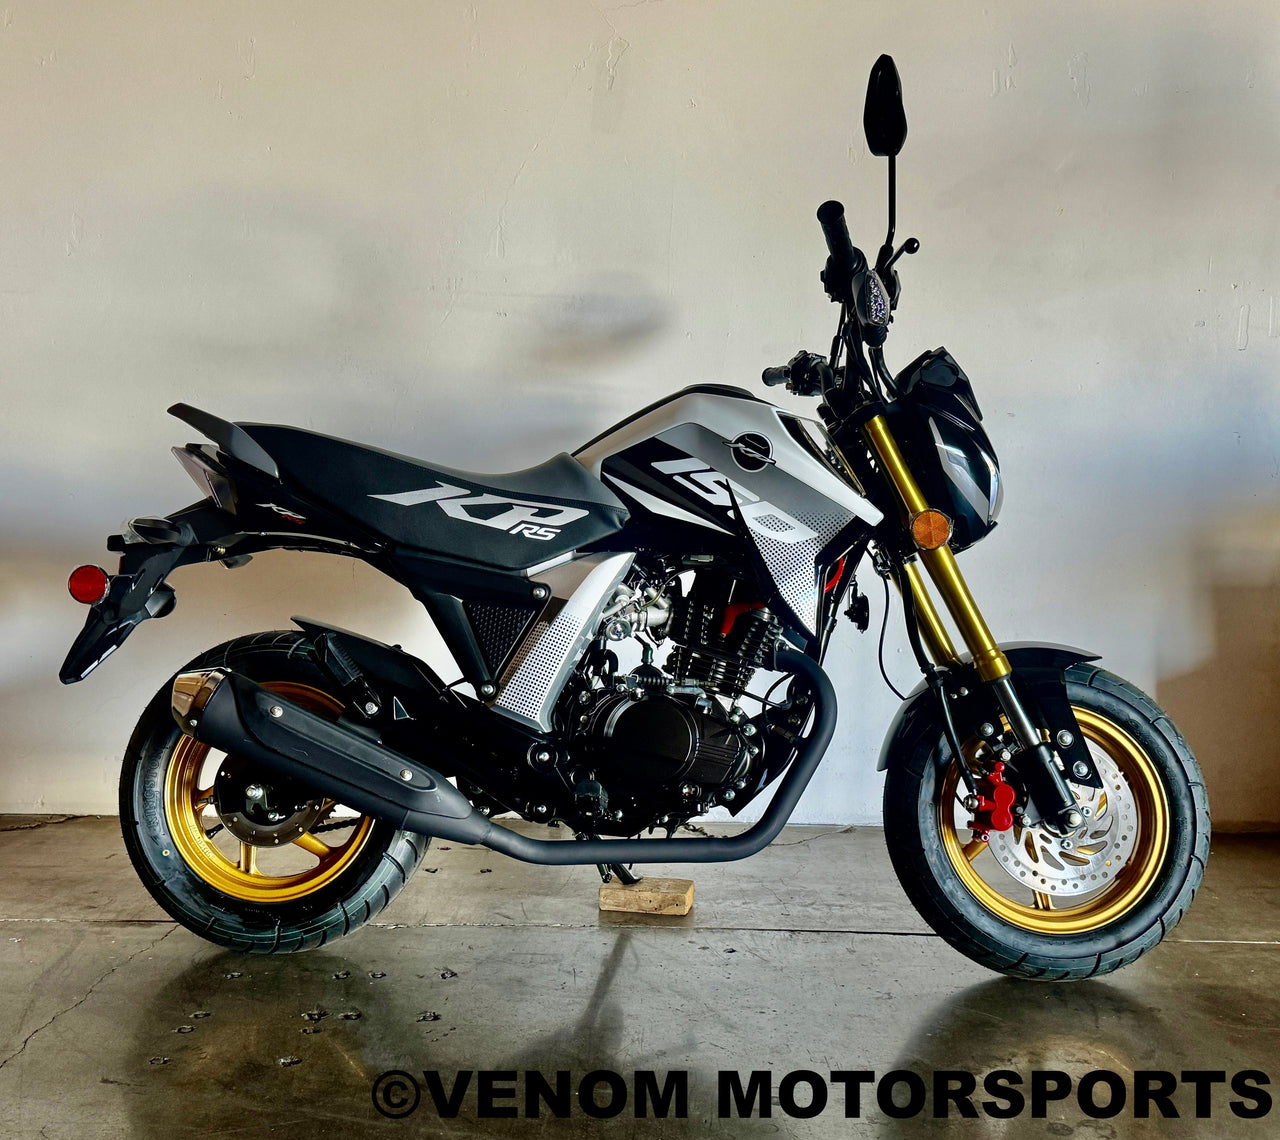 Lifan KP-Mini RS | 150cc EFI Motorcycle | Fuel Injected | Street Legal [PRE-ORDER]